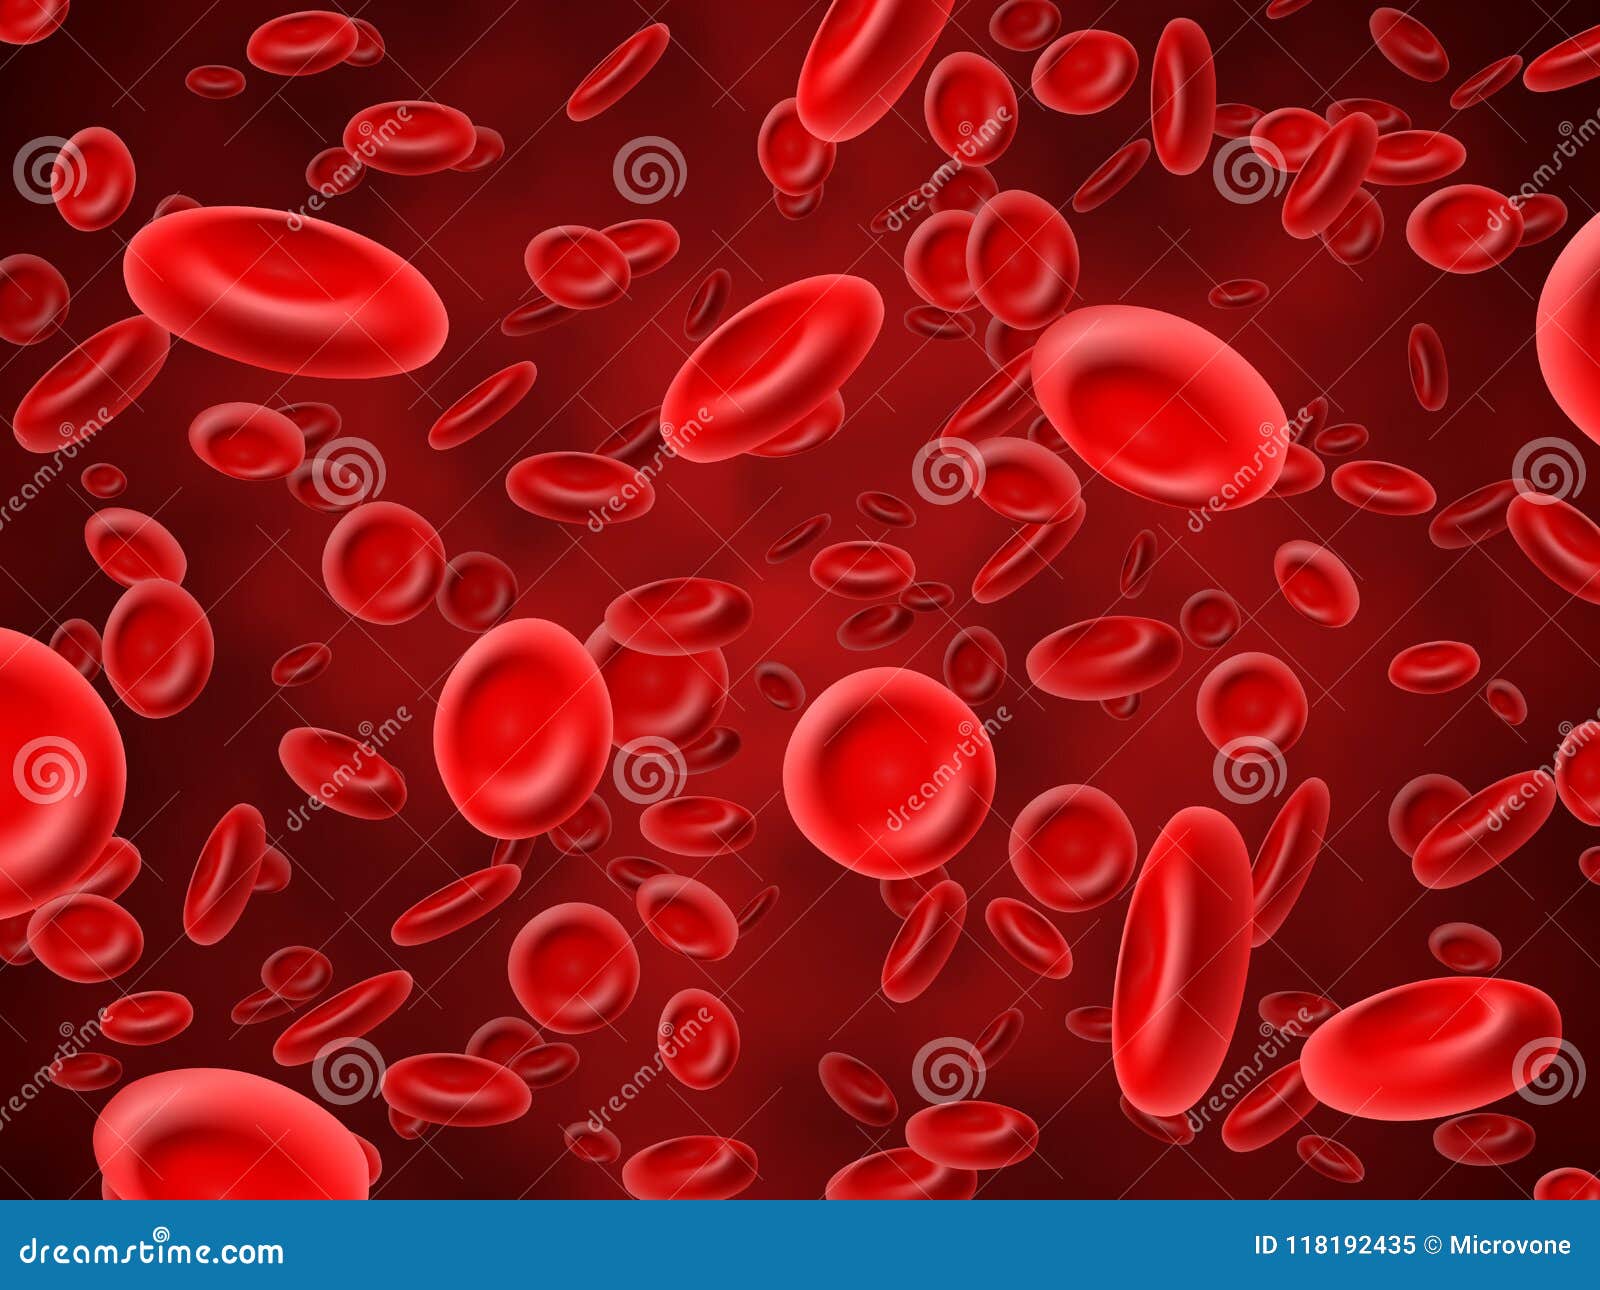 red blood cells. medical hematology  background with 3d macro erythrocytes